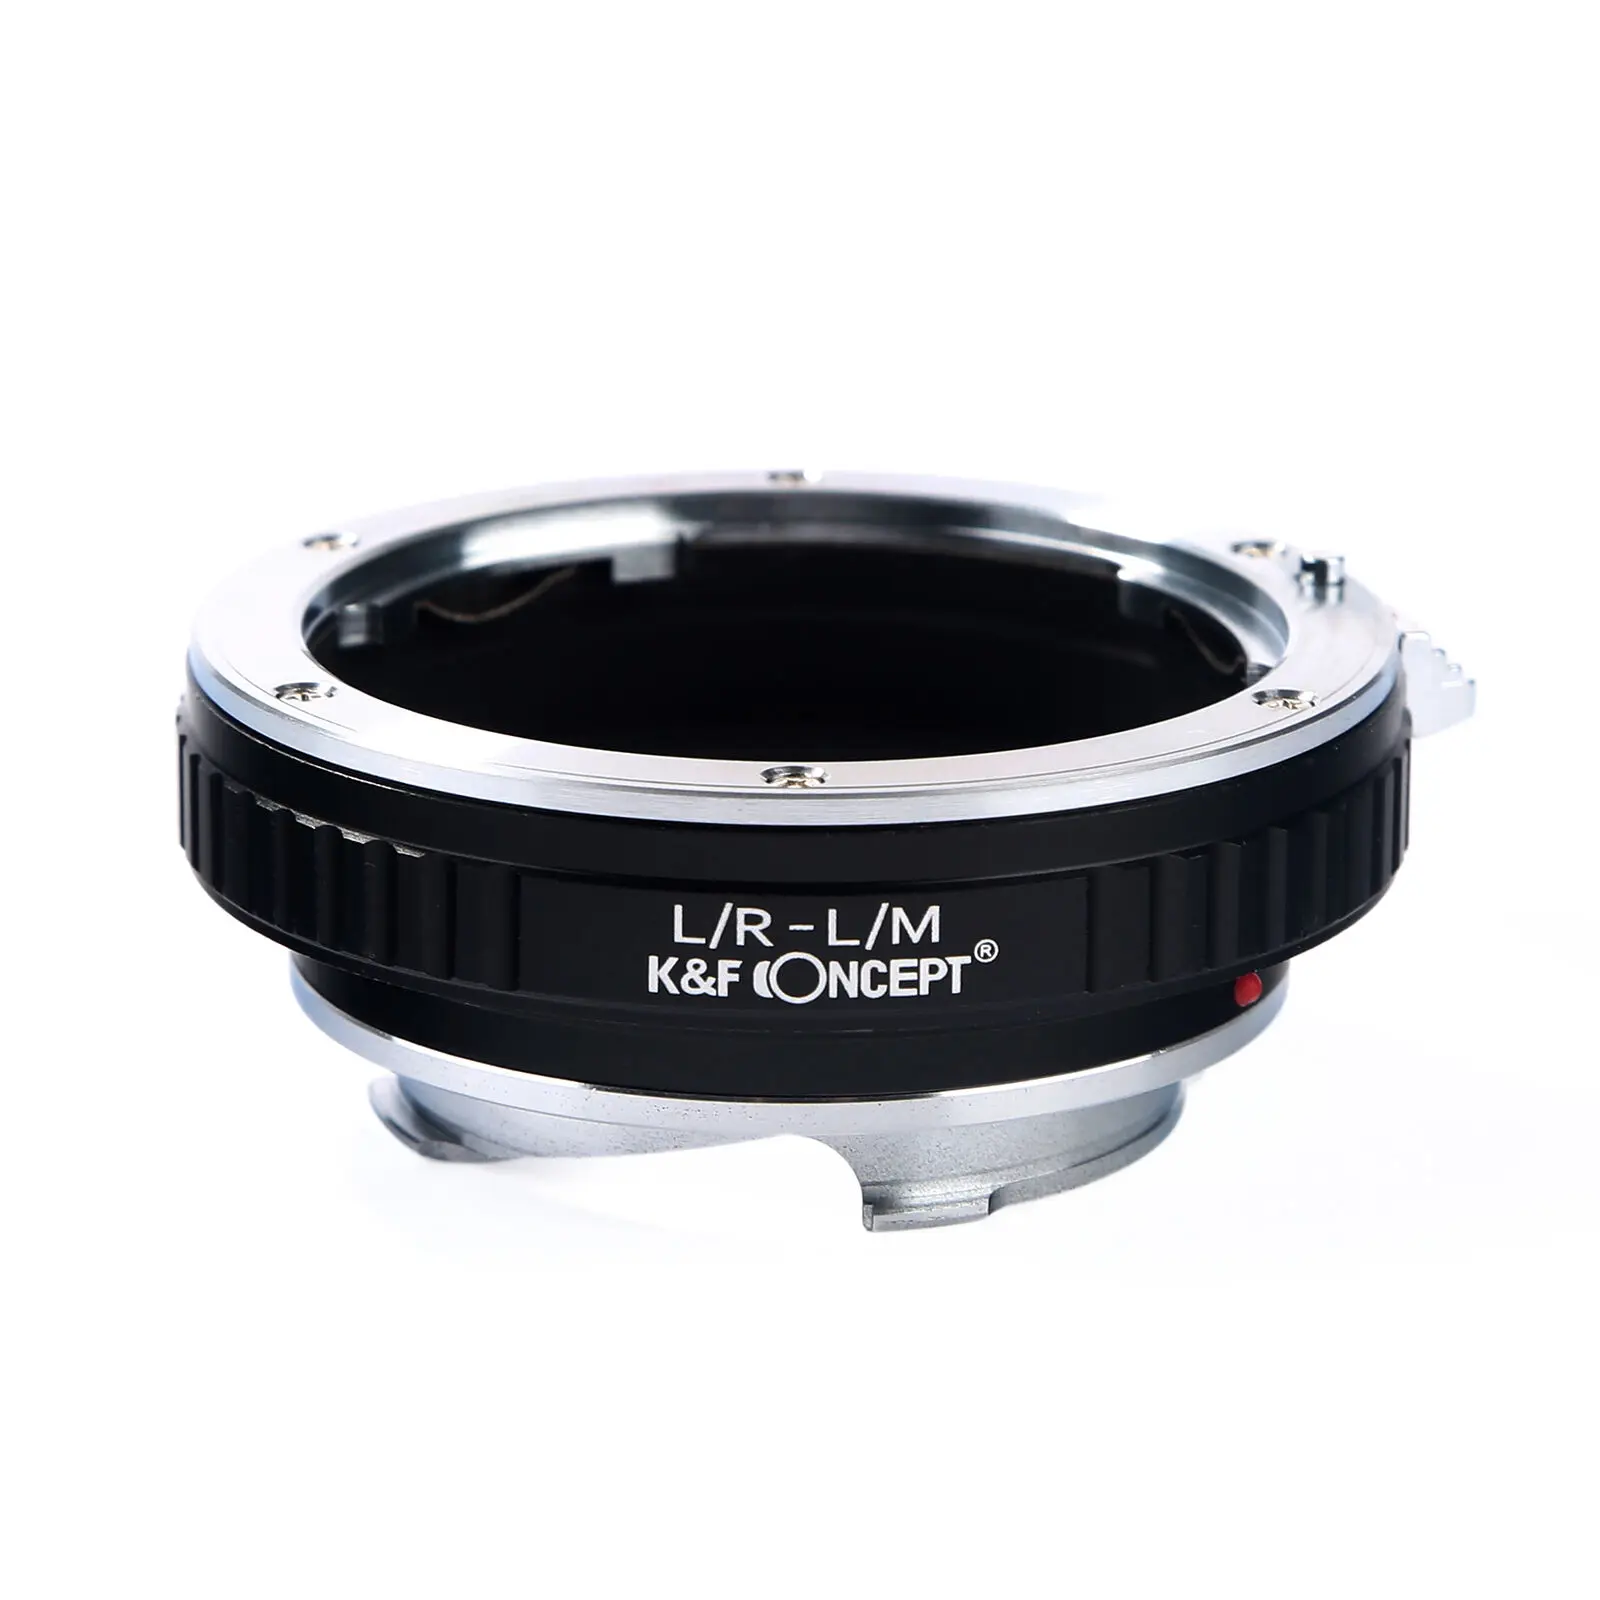 

K&F Concept L/R-L/M Adapter for Leica R Mount Lens to Leica M Camera M240 M10 M9 M8 M7 M6 M5 M4 MP MD CL typ240 Lens Adapter